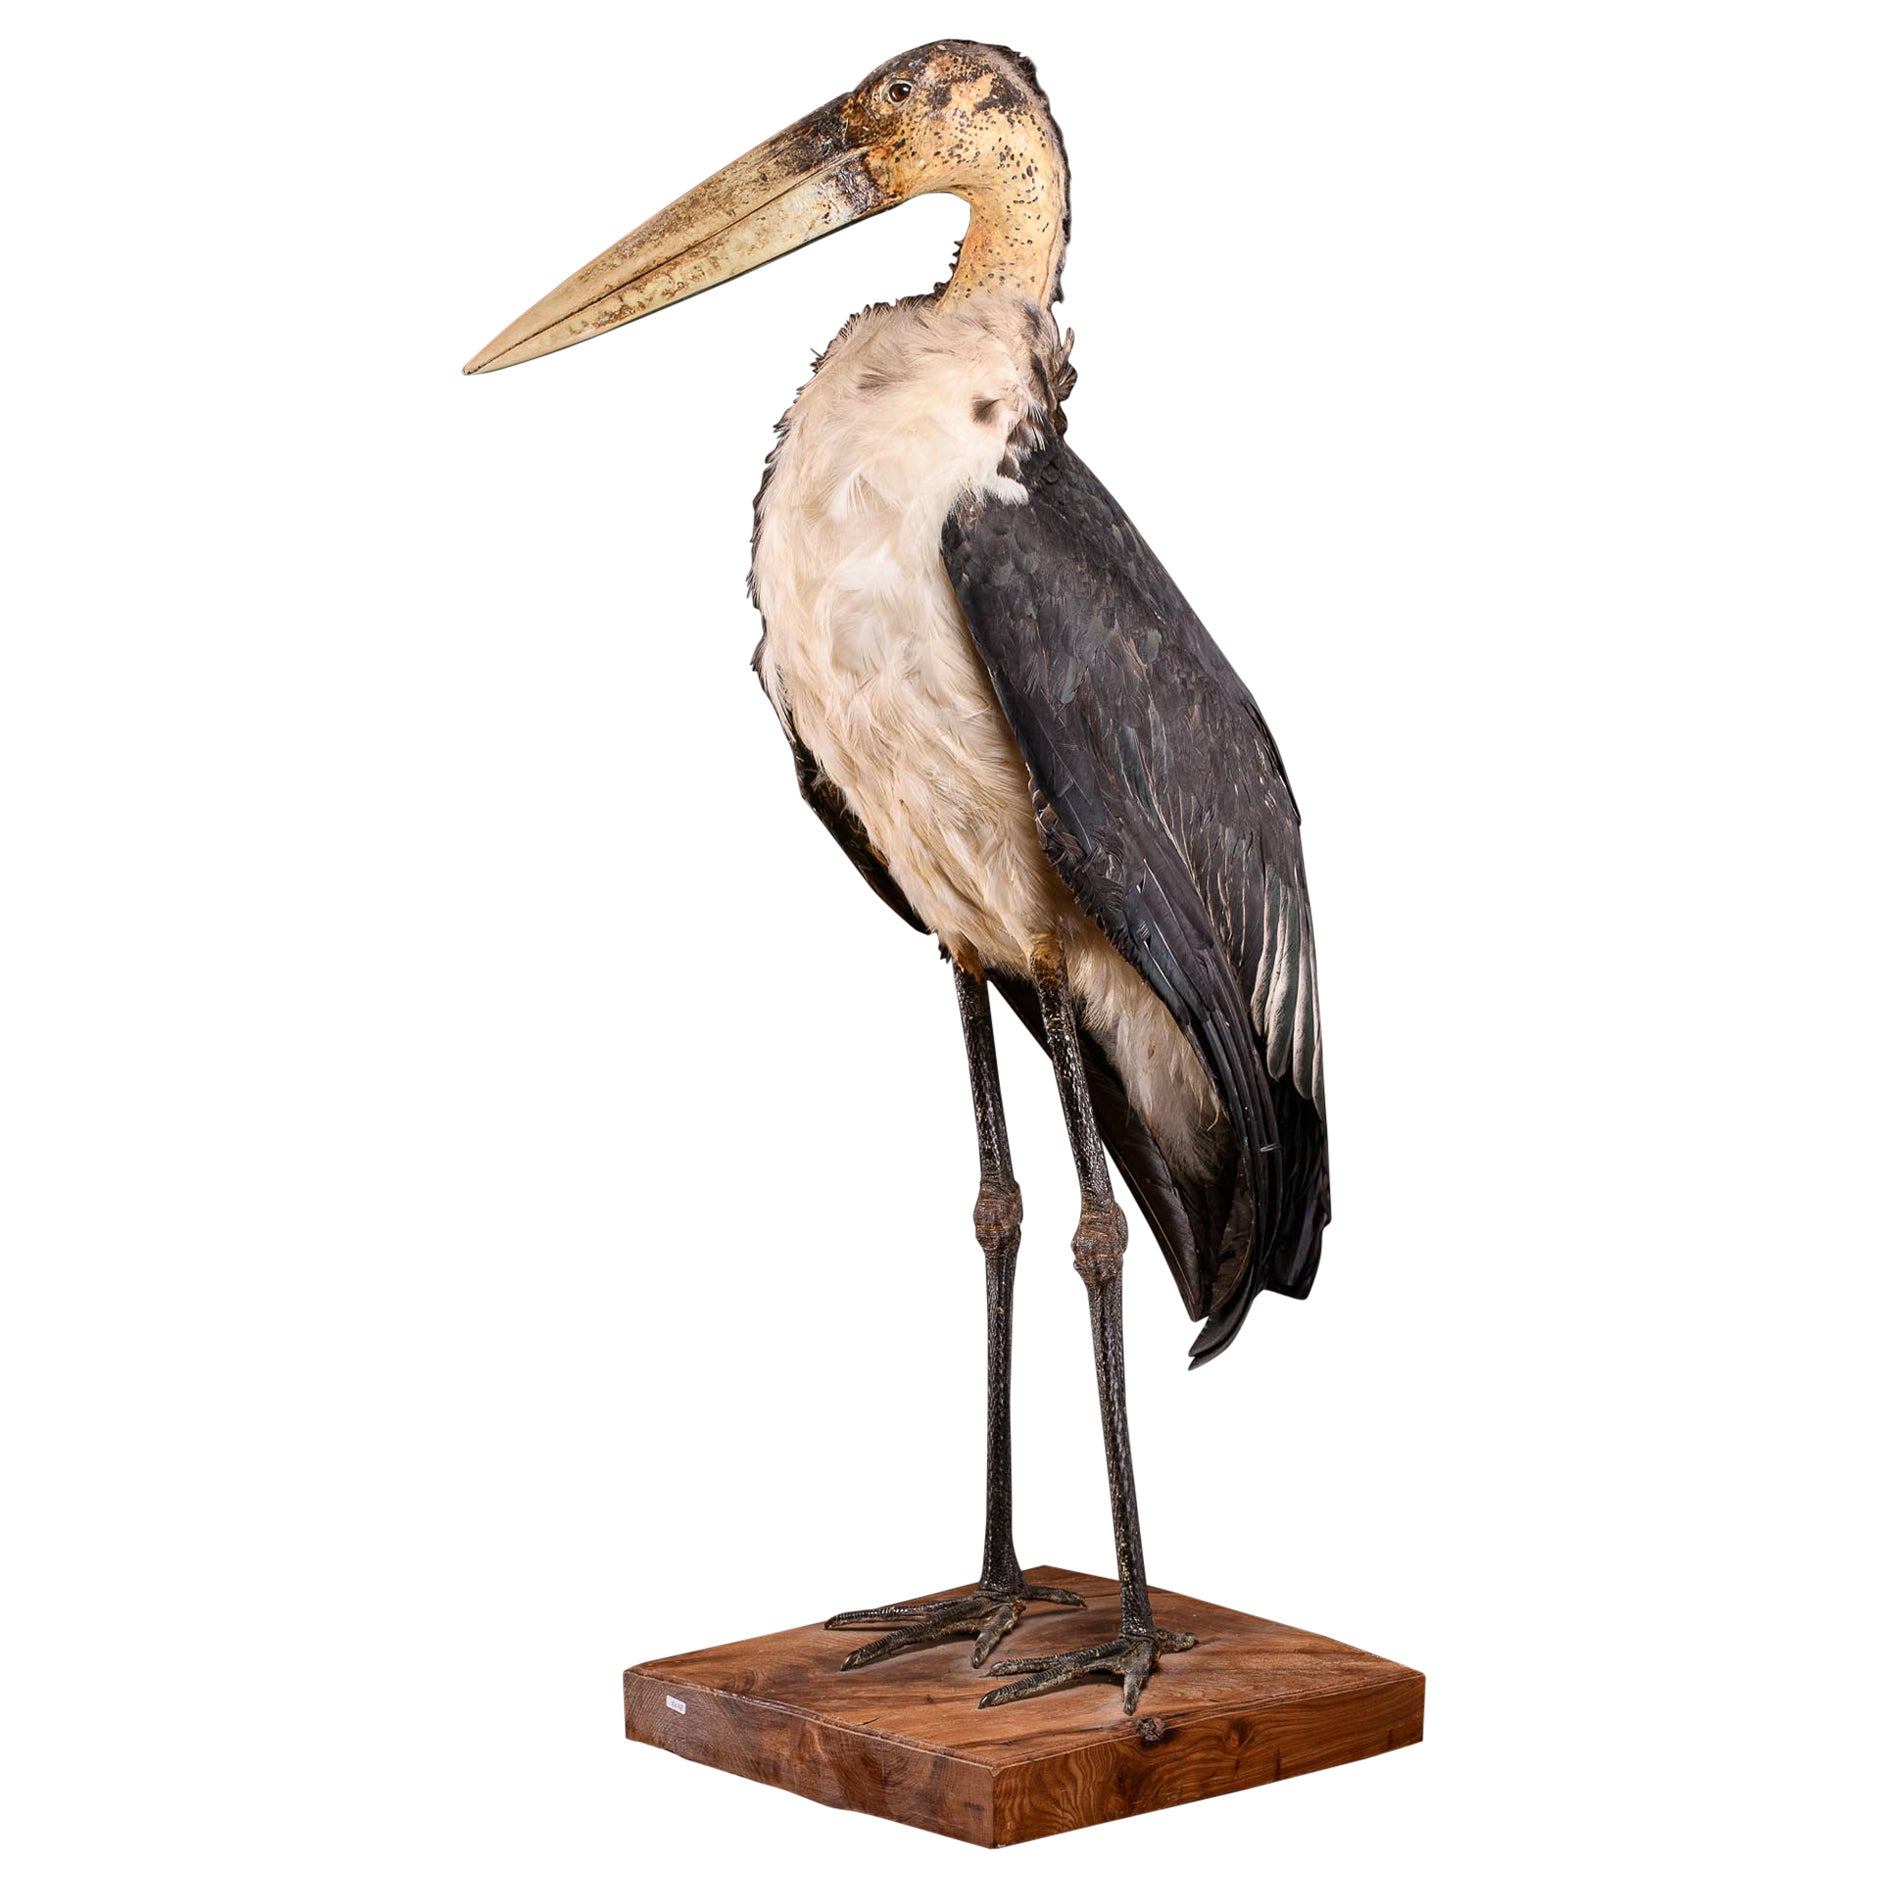 Marabou Stork taxidermy For Sale